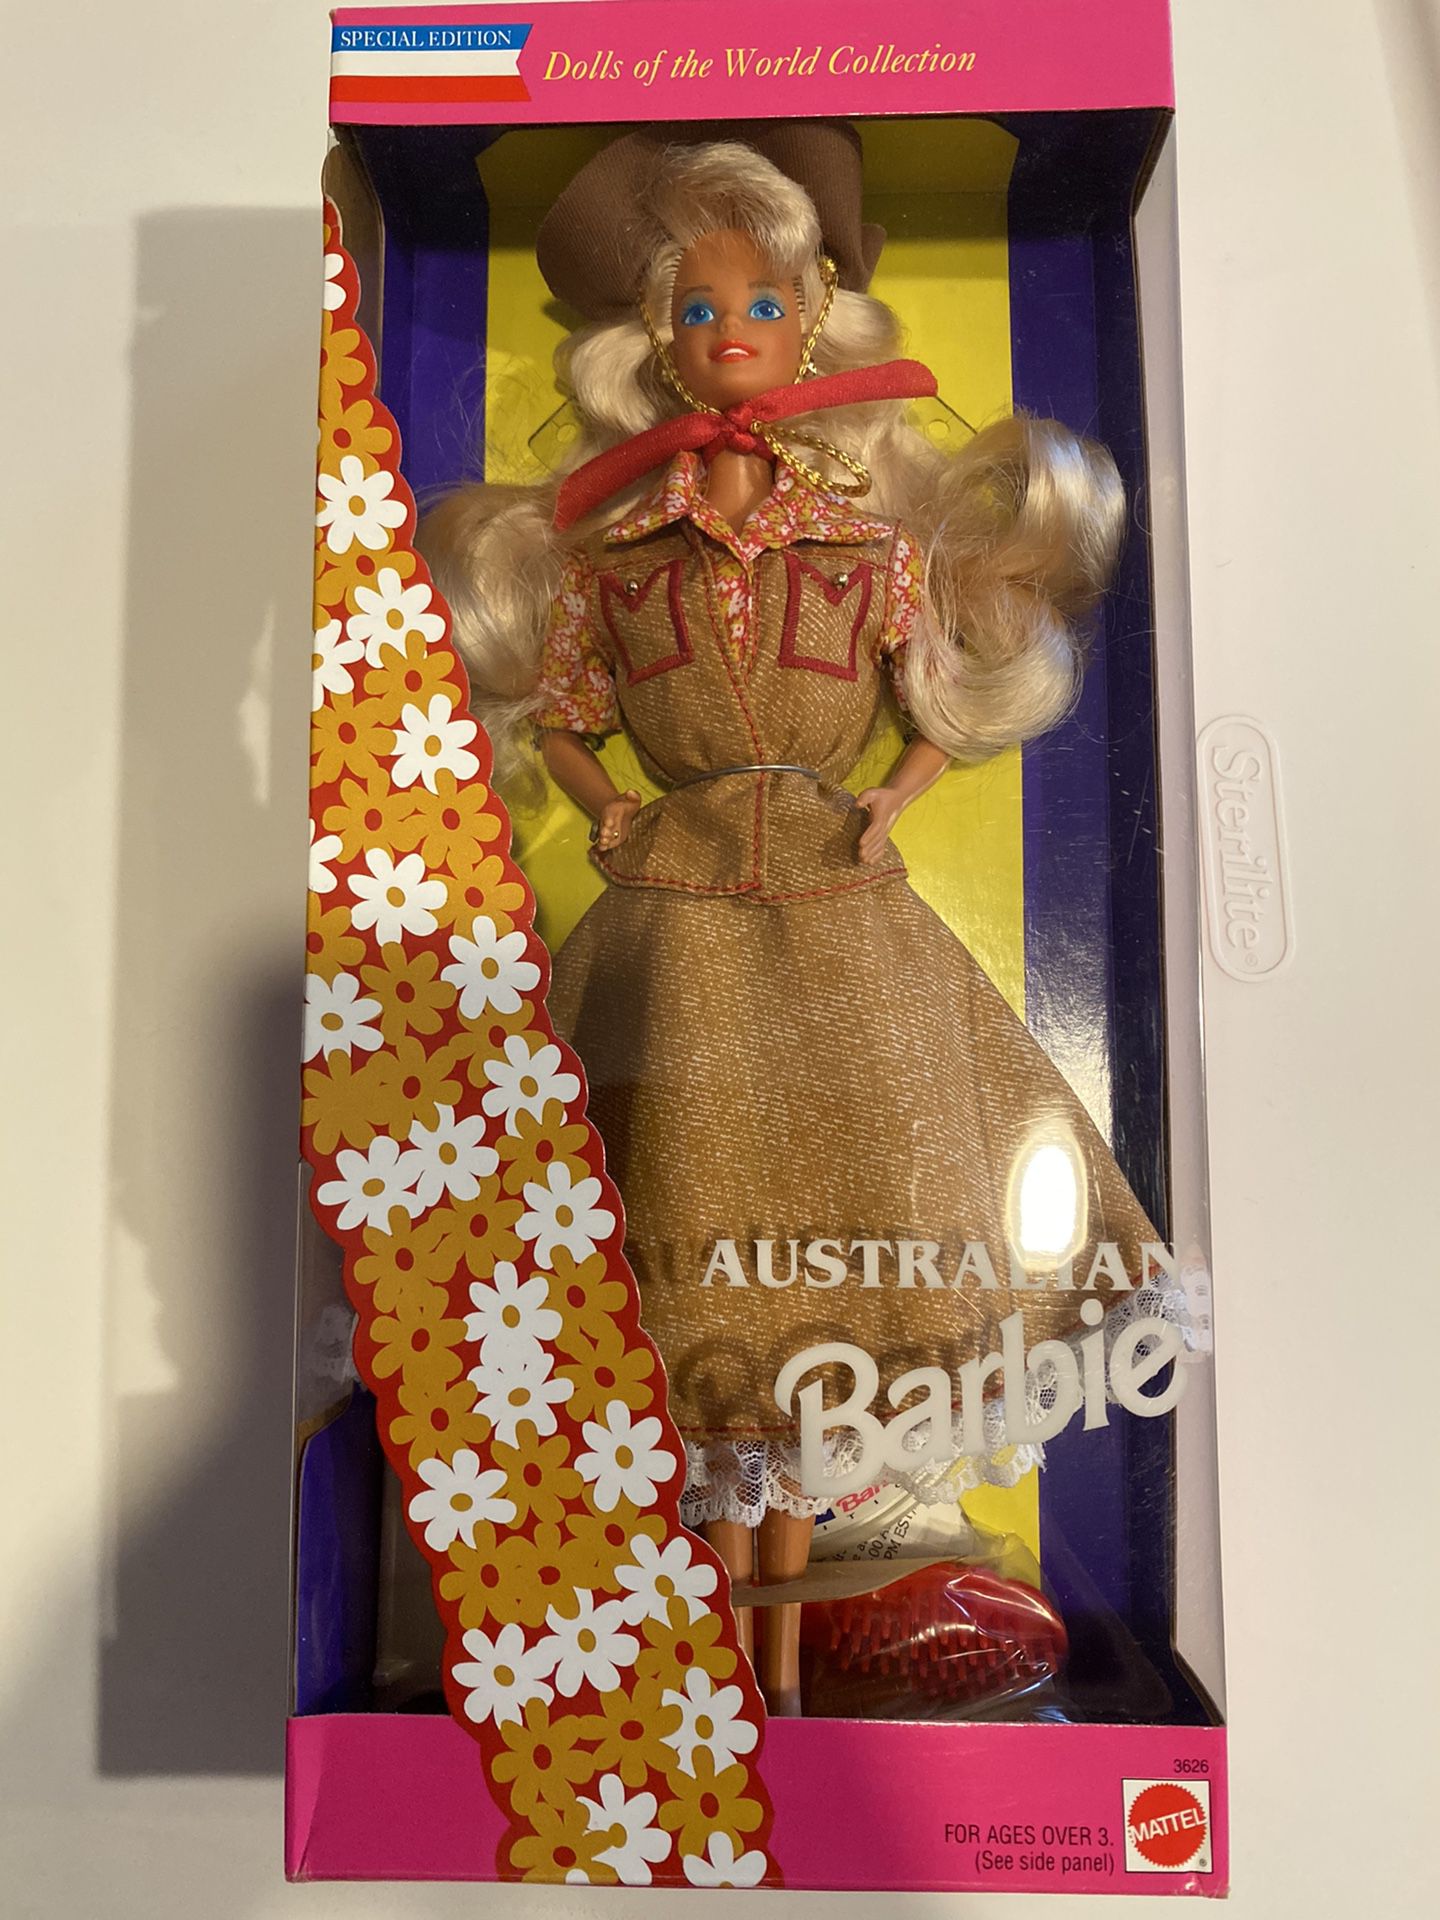 Barbie Australian Dolls of the World Collection